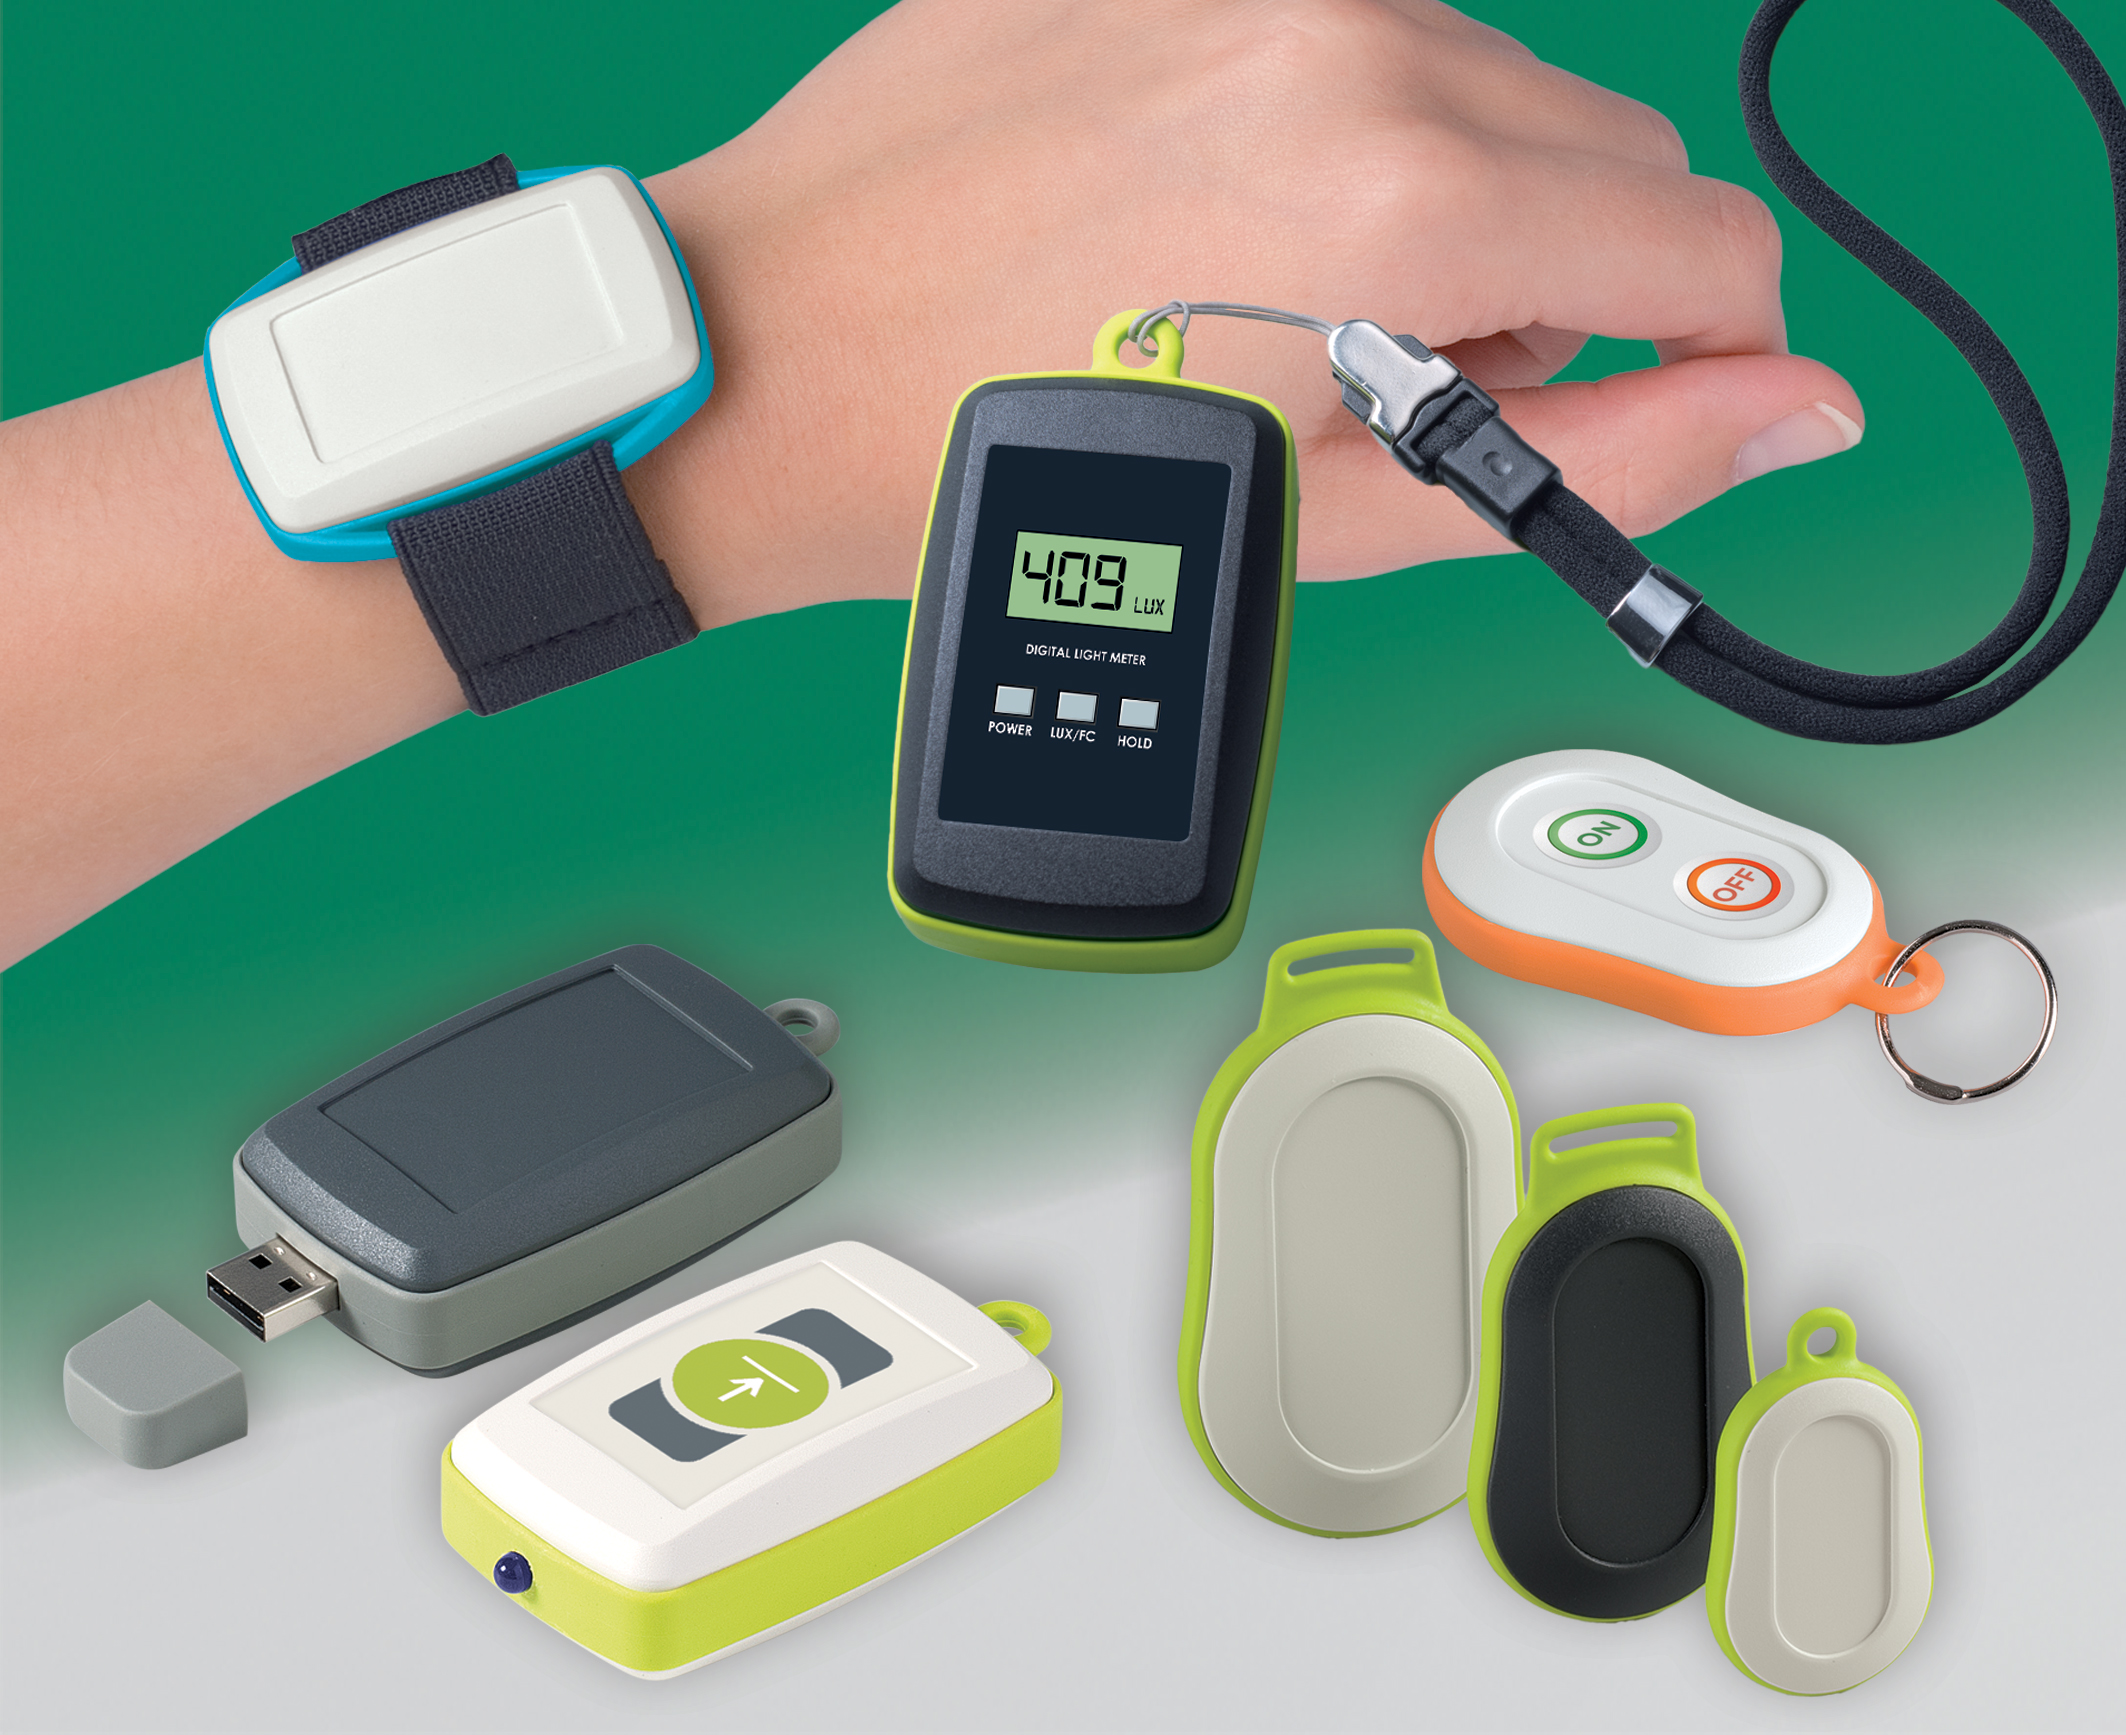 OKW’s Award-Winning MINITEC Enclosures For Handheld And Wearable Electronics